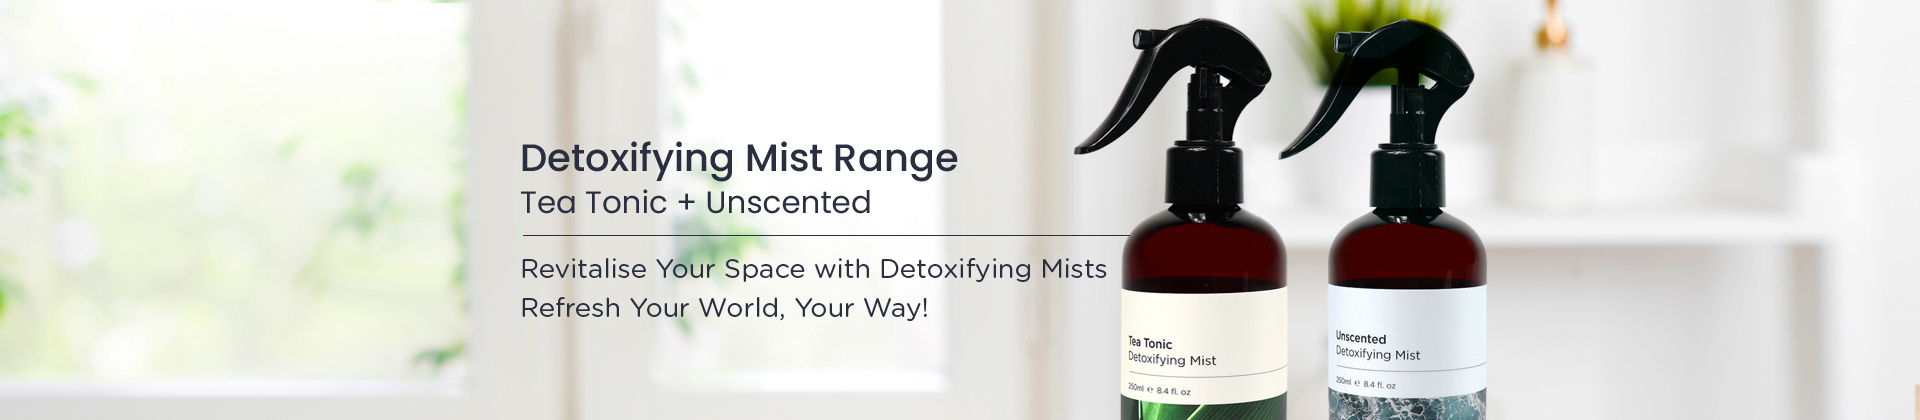 NEW PRODUCTS: Detoxifying Mists